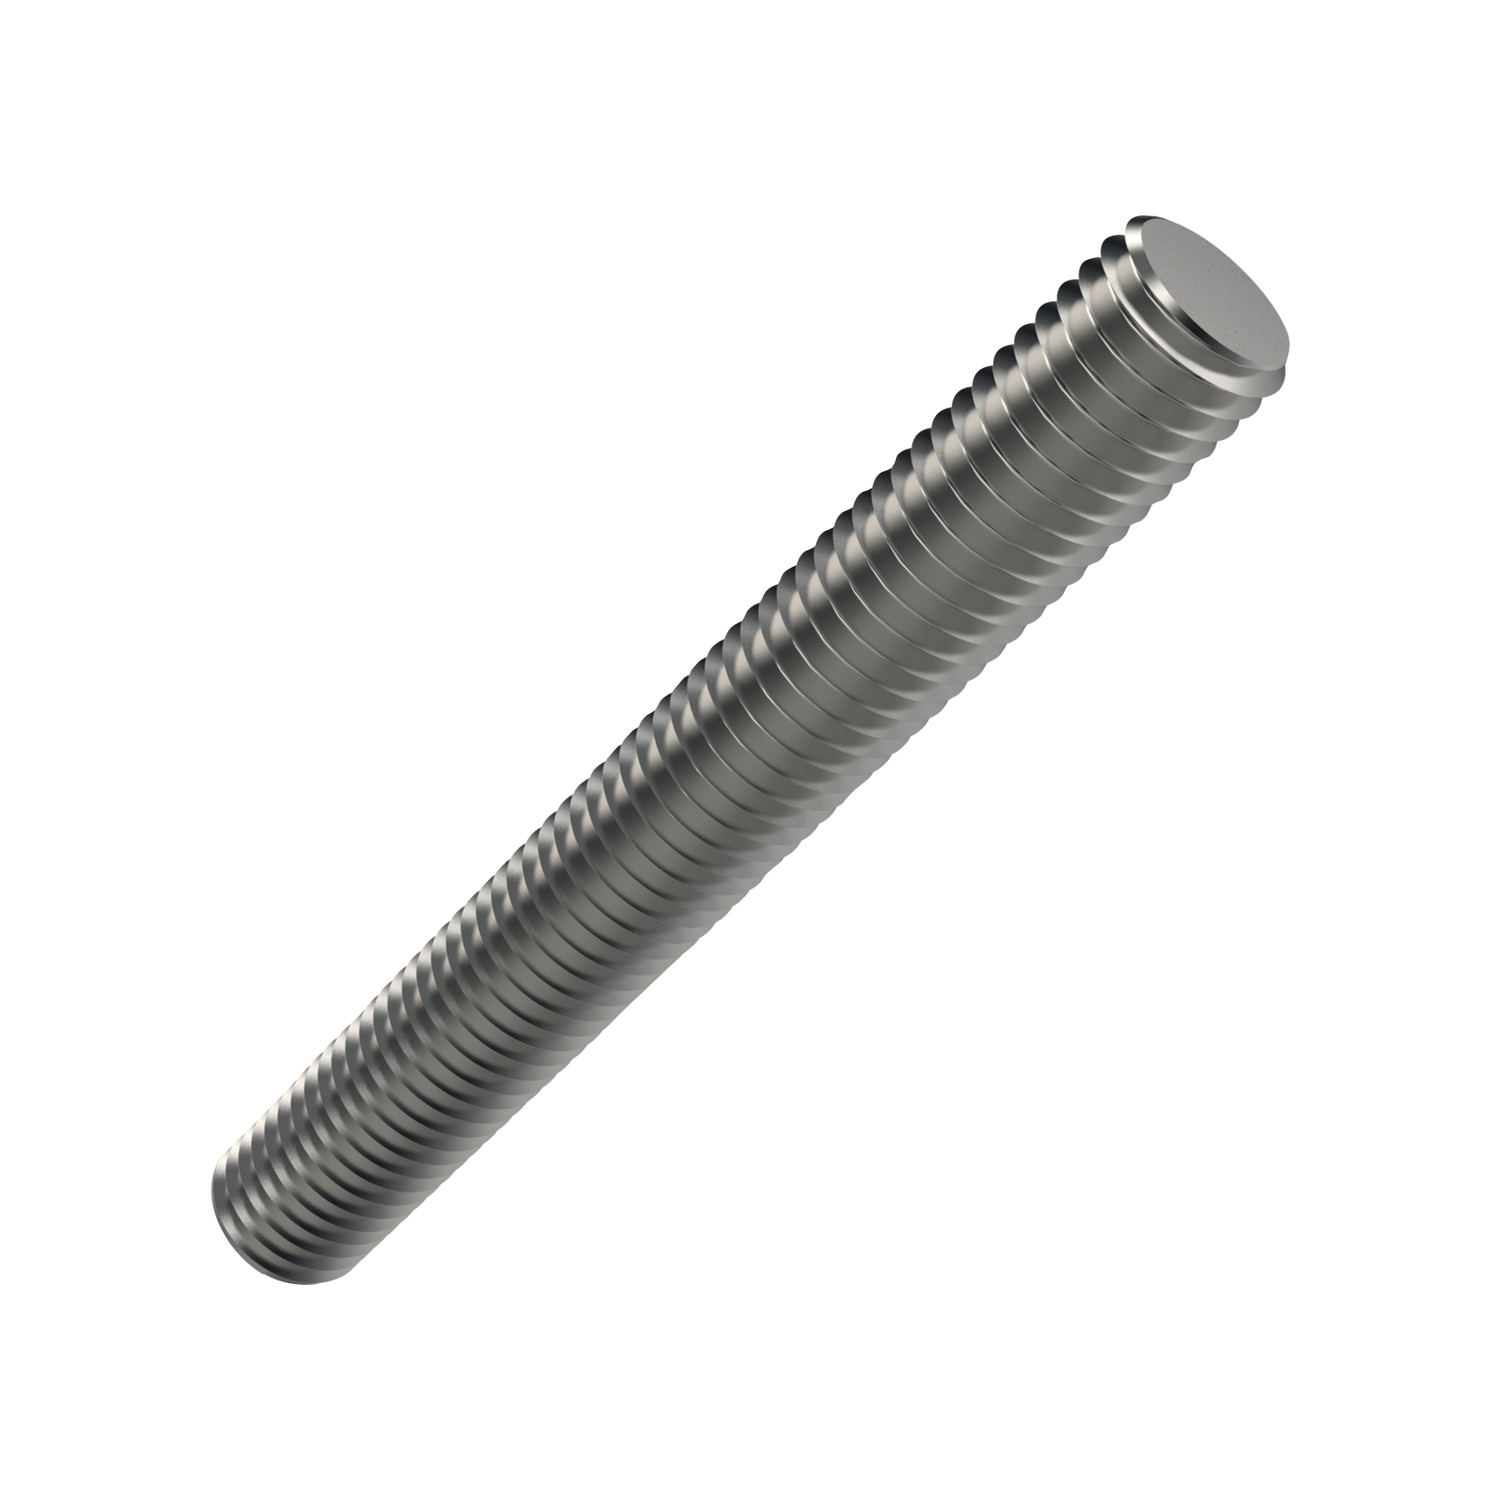 P0290.SS Stainless Threaded Rod